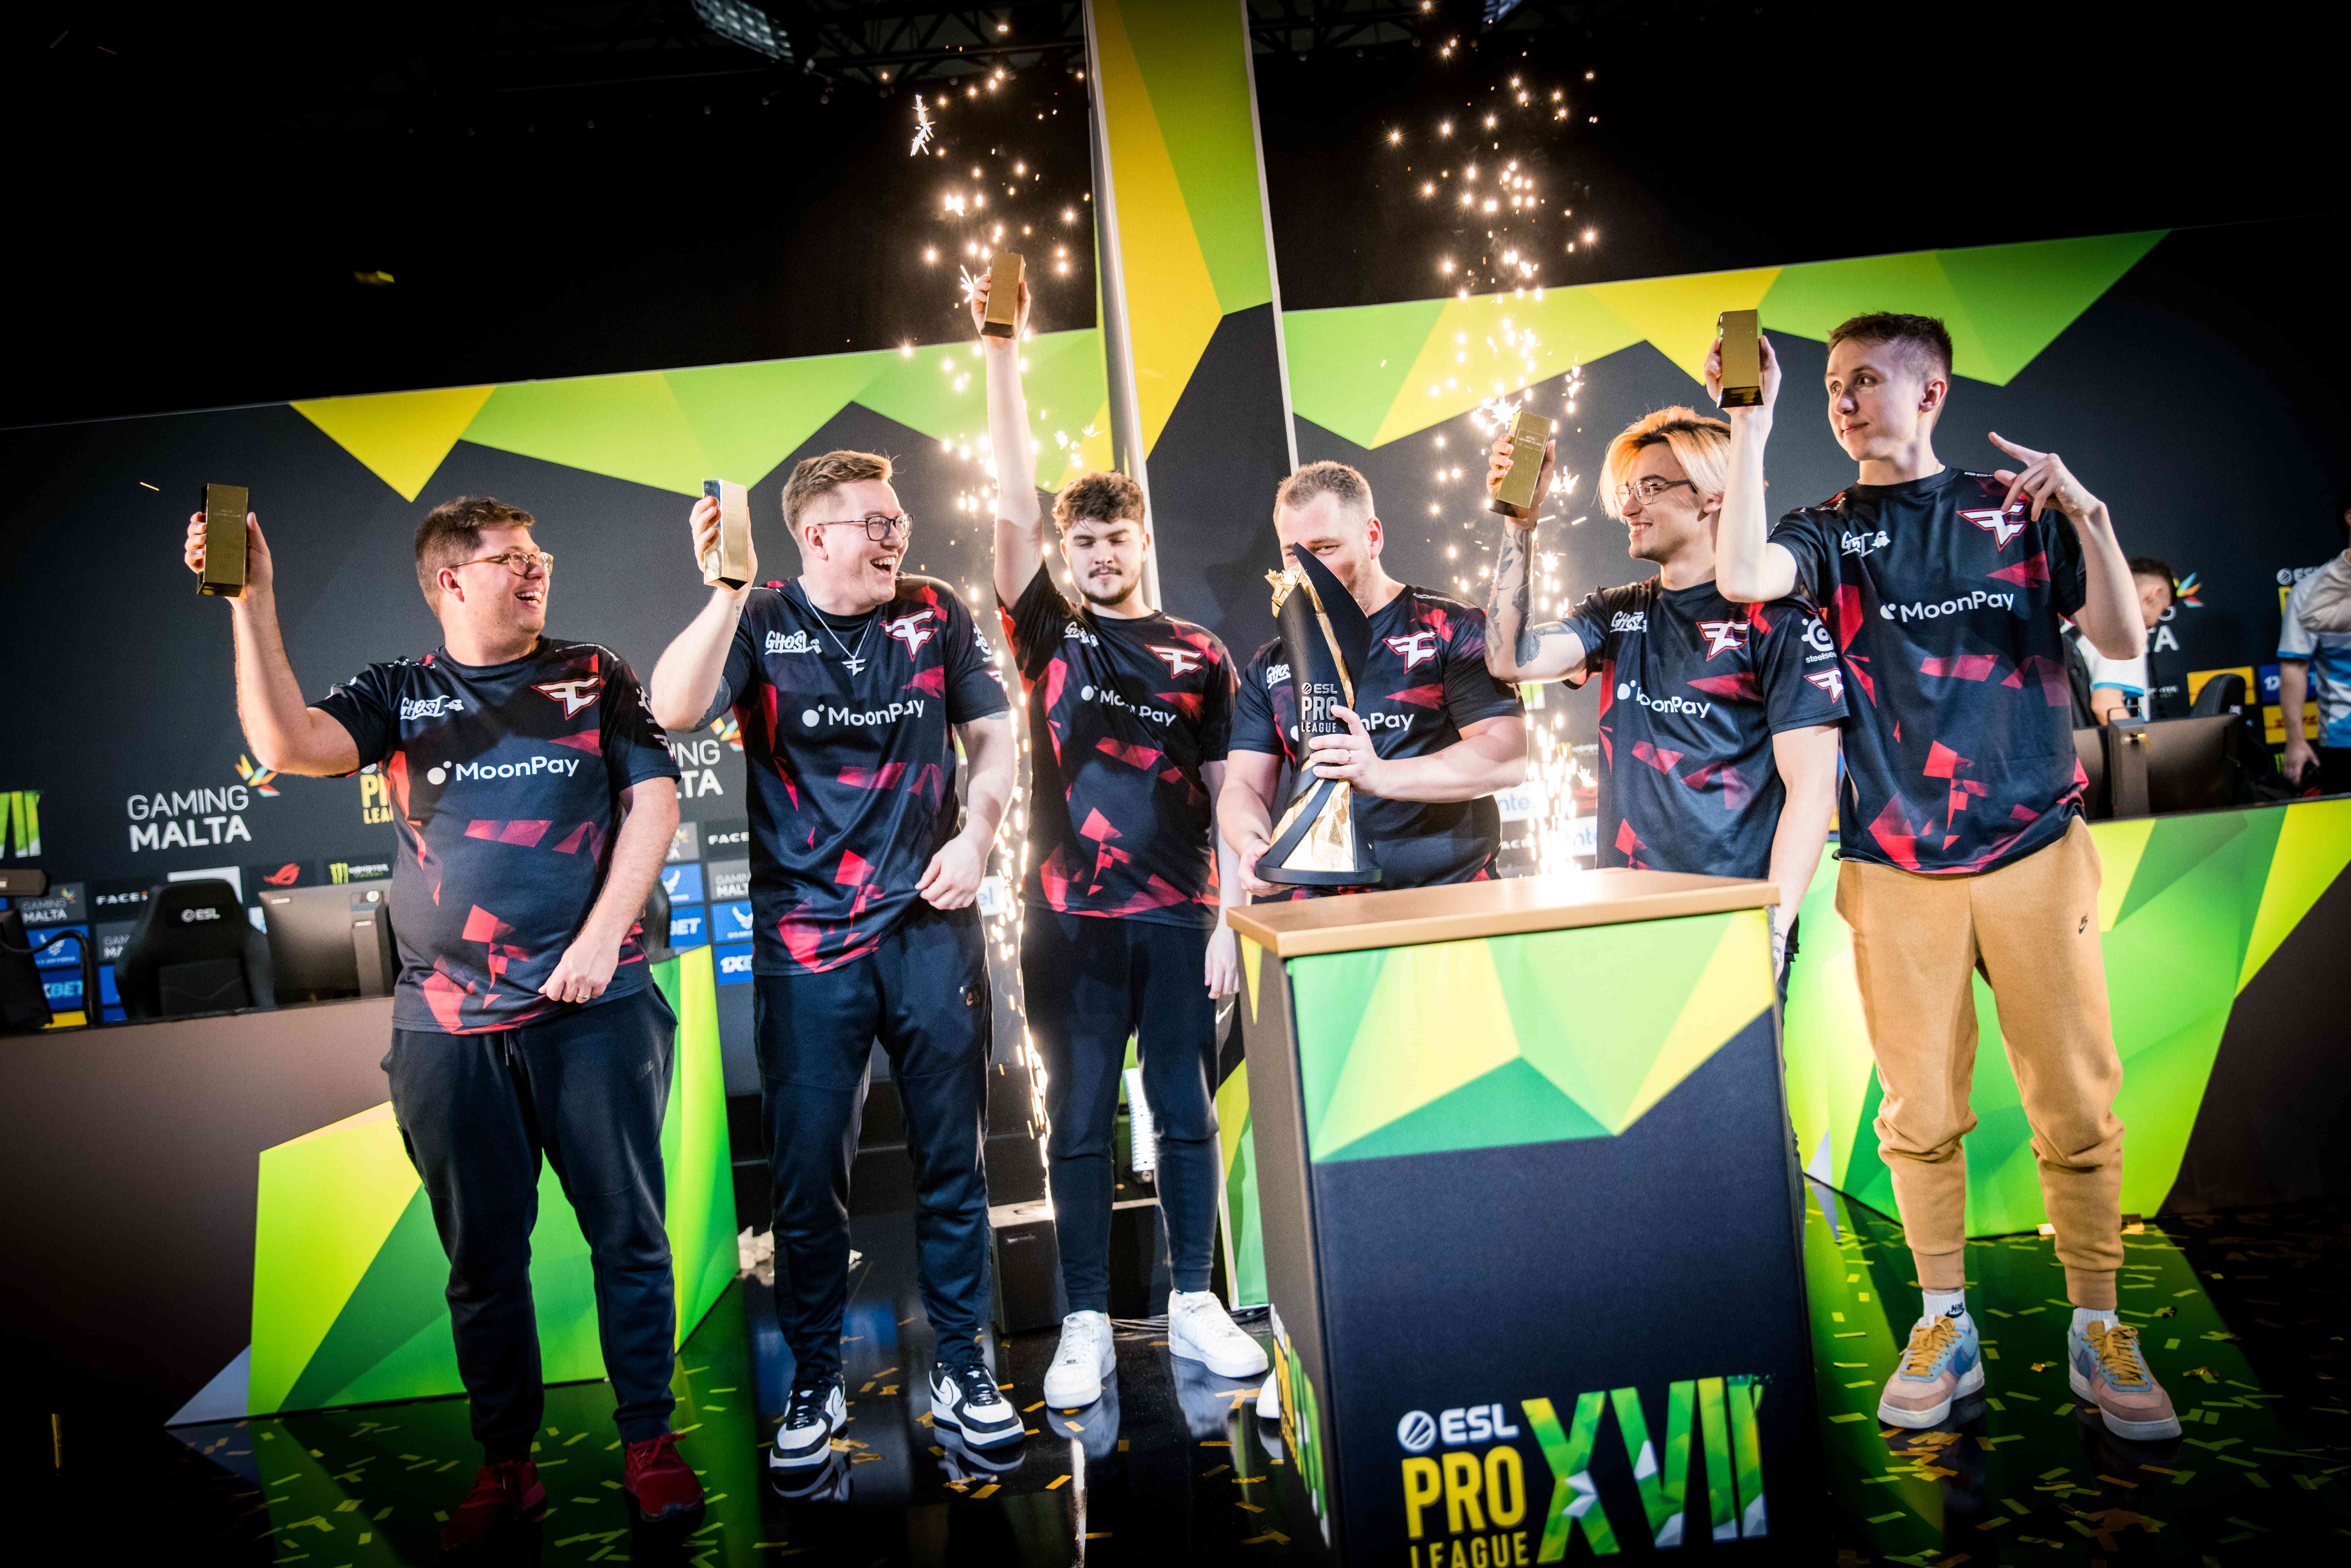 FaZe are now far from their ESL Pro League peaks (Image Credits: ESL | Helena Kristiansson)